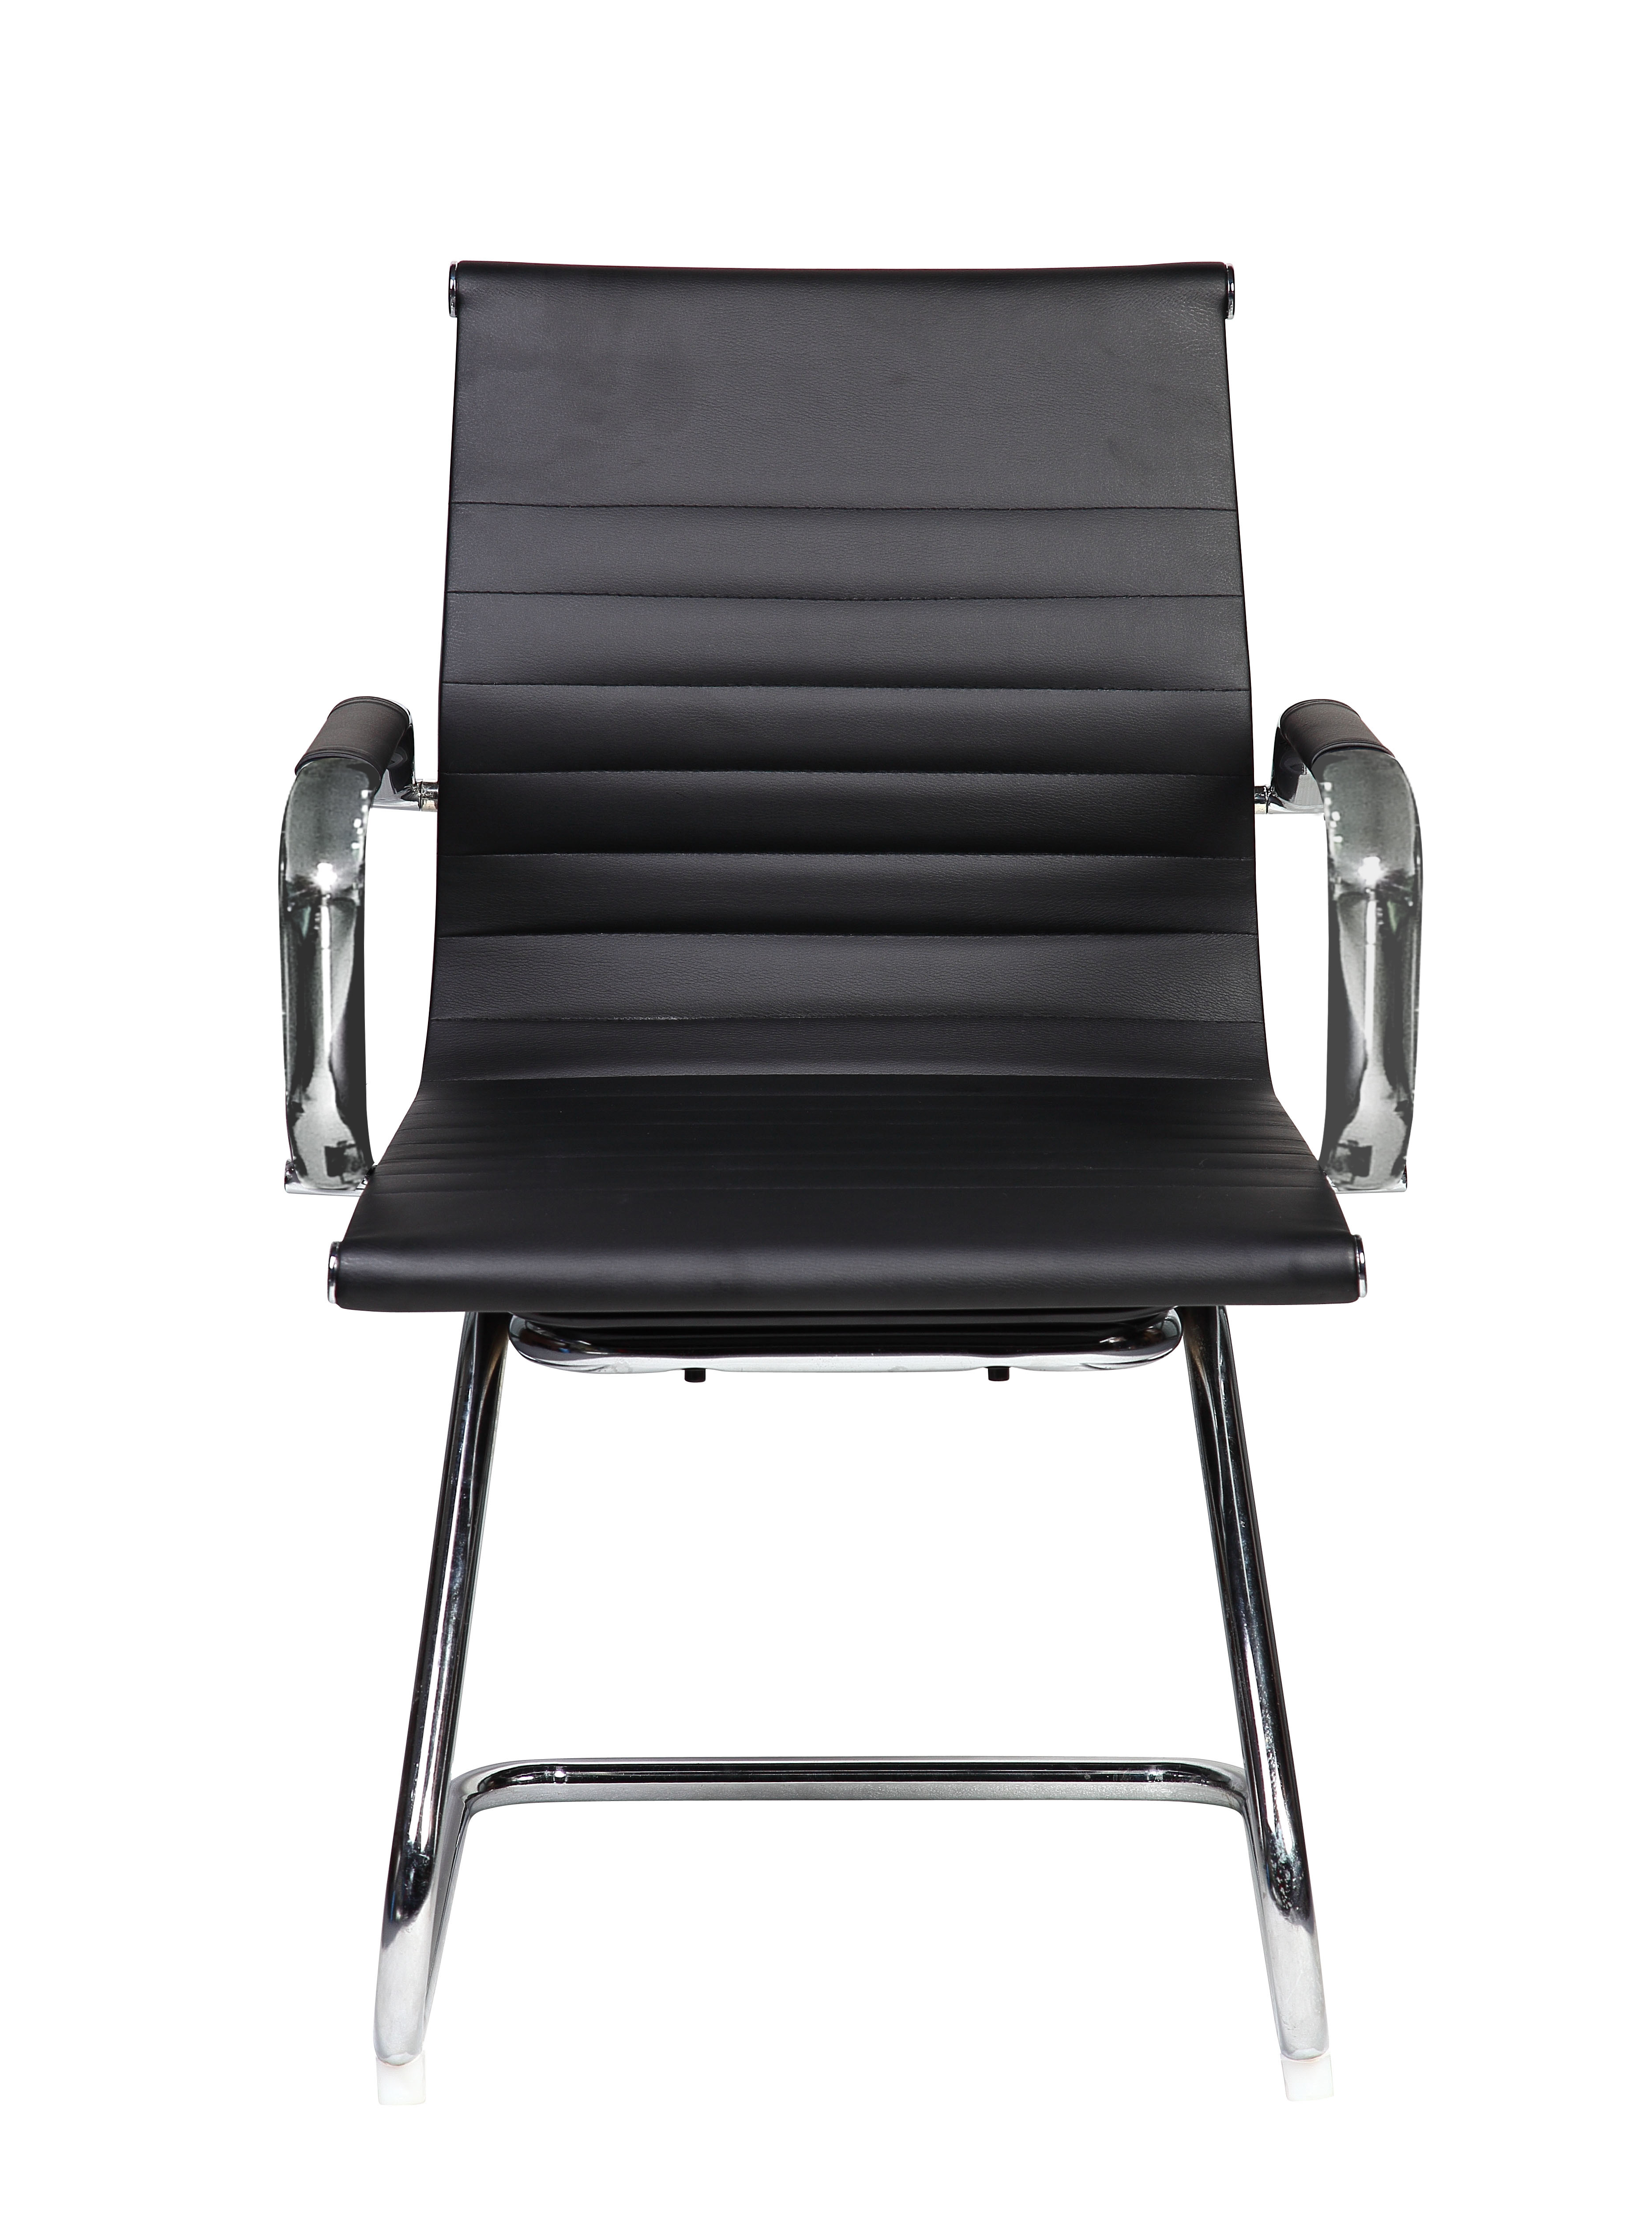 Techni Mobili Modern Visitor Office Chair, Black - image 5 of 8